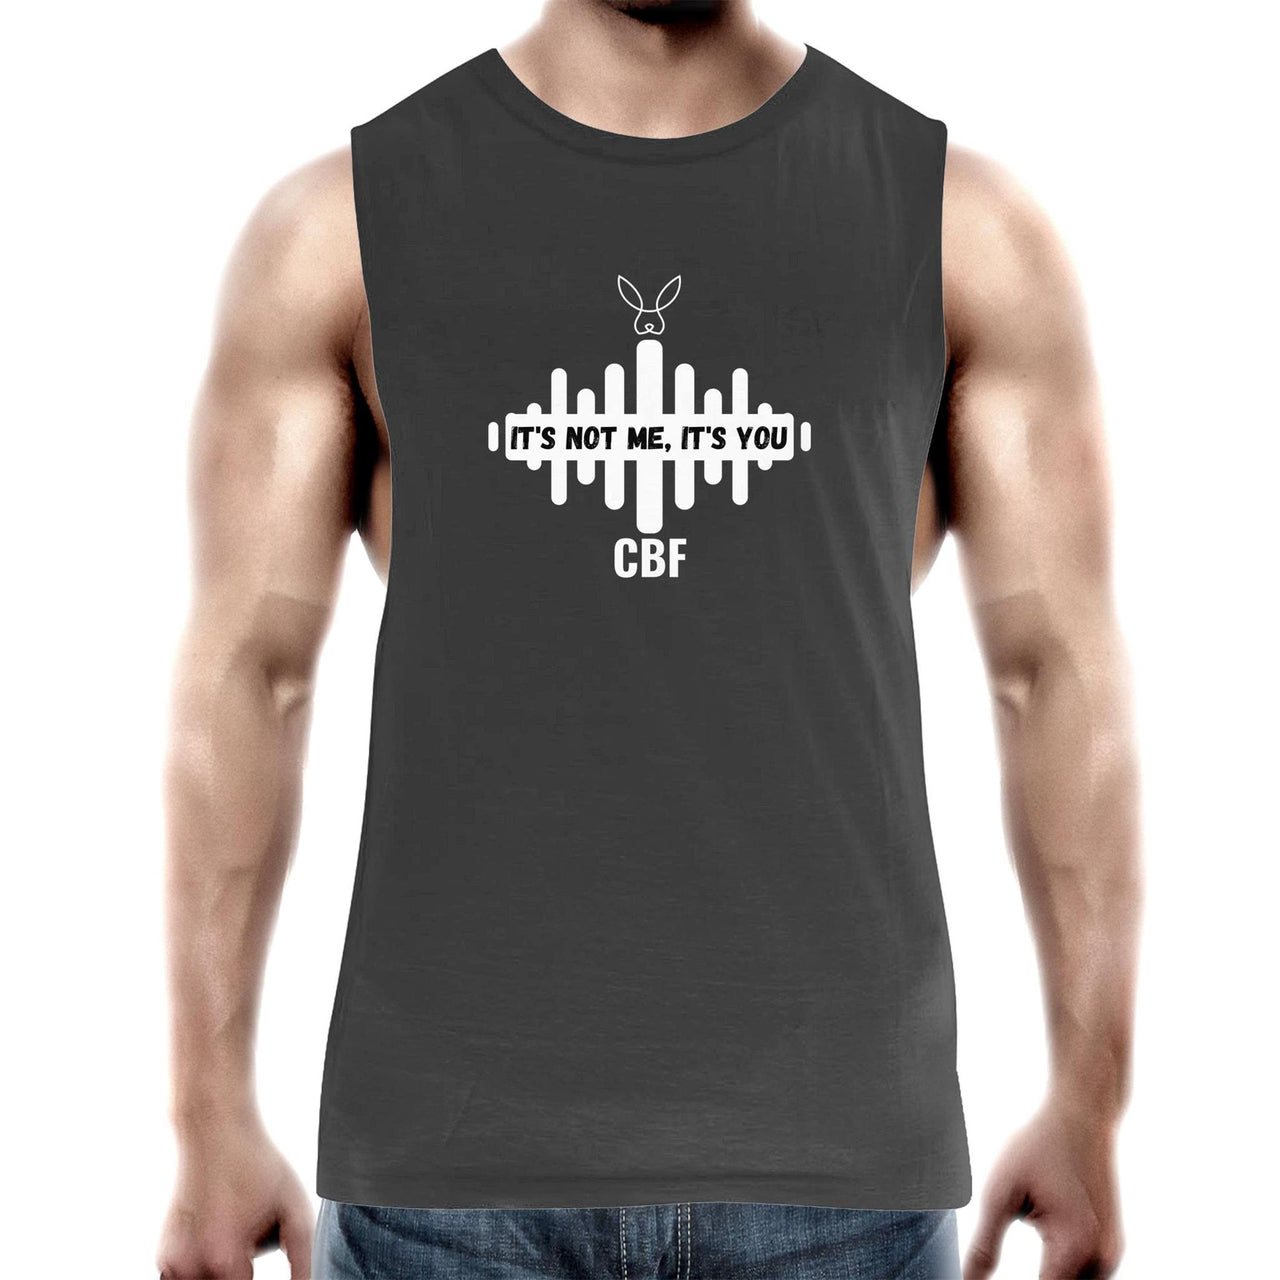 Not Me it's You Tank Top Tee by CBF Clothing in Black